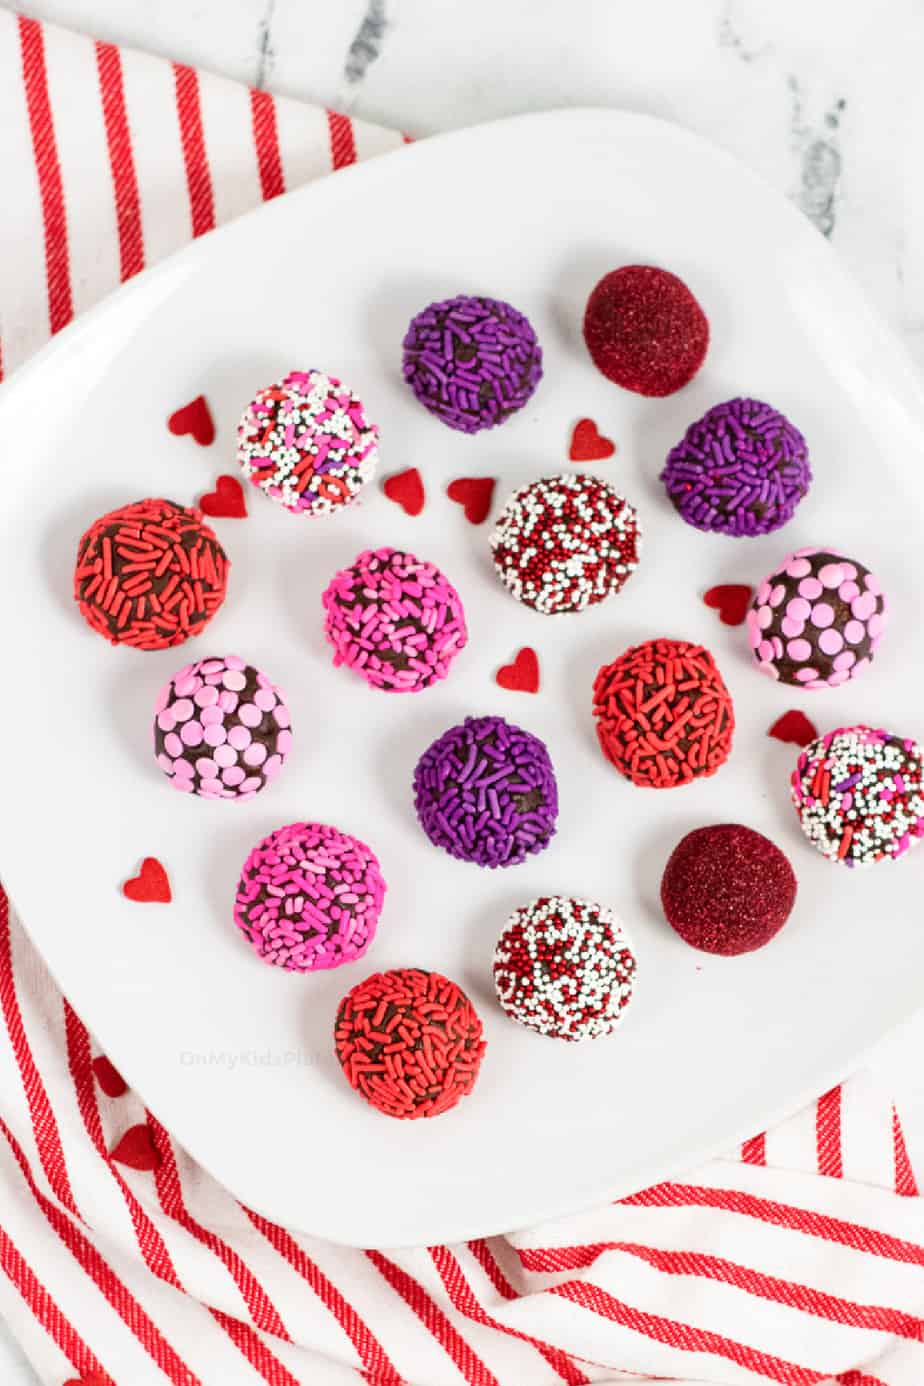 Overhead view of a platter of lined up brownie truffles covered in red, pink and purple sprinkles